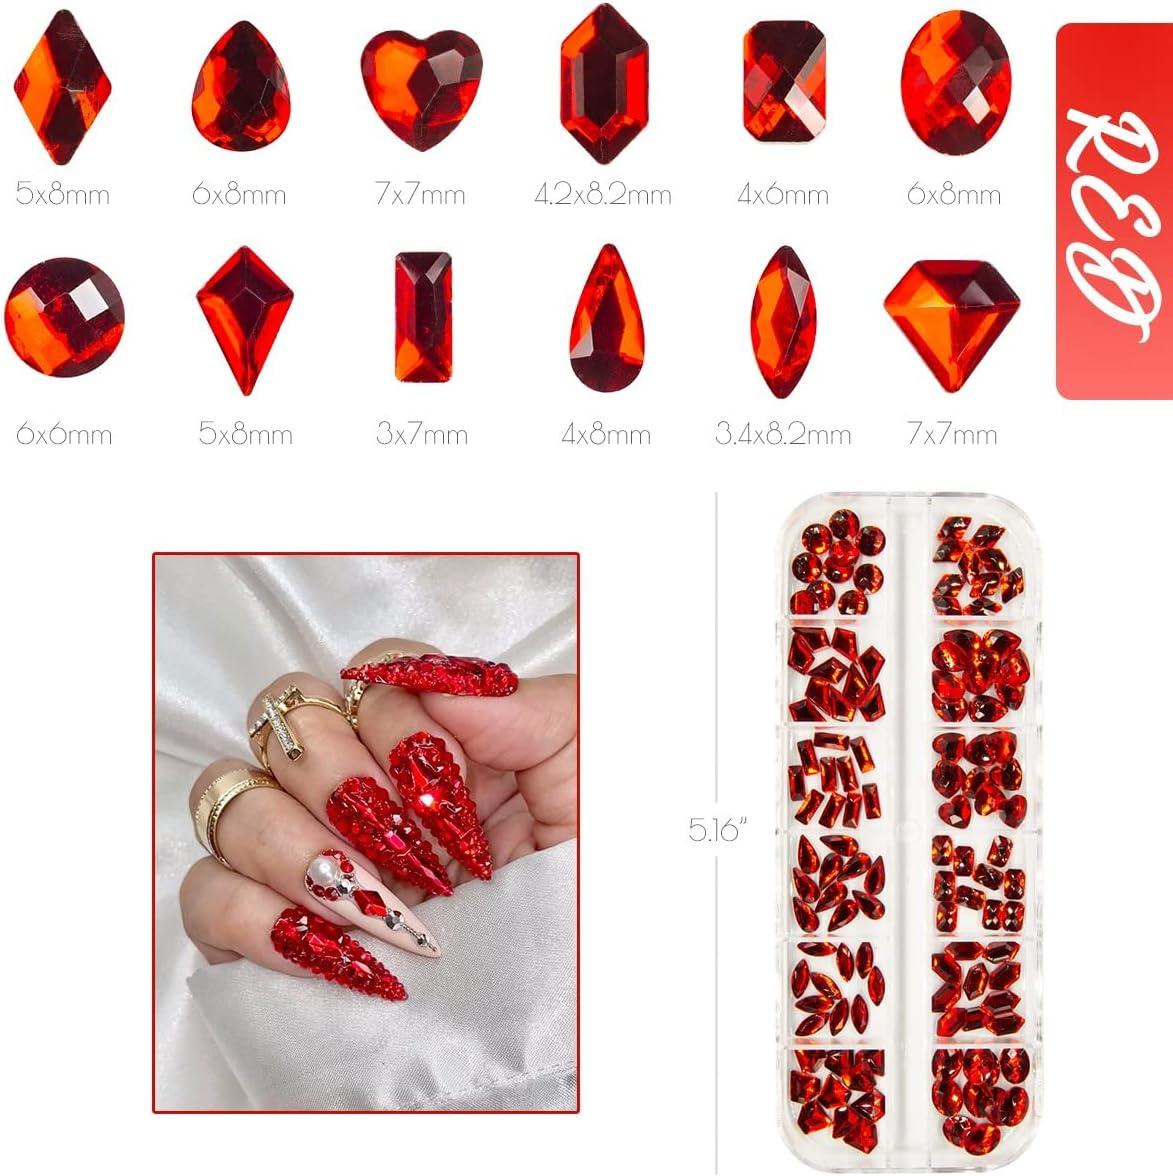 qiipii 120Pcs Red Rhinestones Nail Charms 12 Shapes Crystal Flatback Siam  Red Big Gems Ruby Red K9 Glass Nail Stones Diamonds Jewels Nail Art  Supplies Nail Decor for Nails Face Eyes Makeup